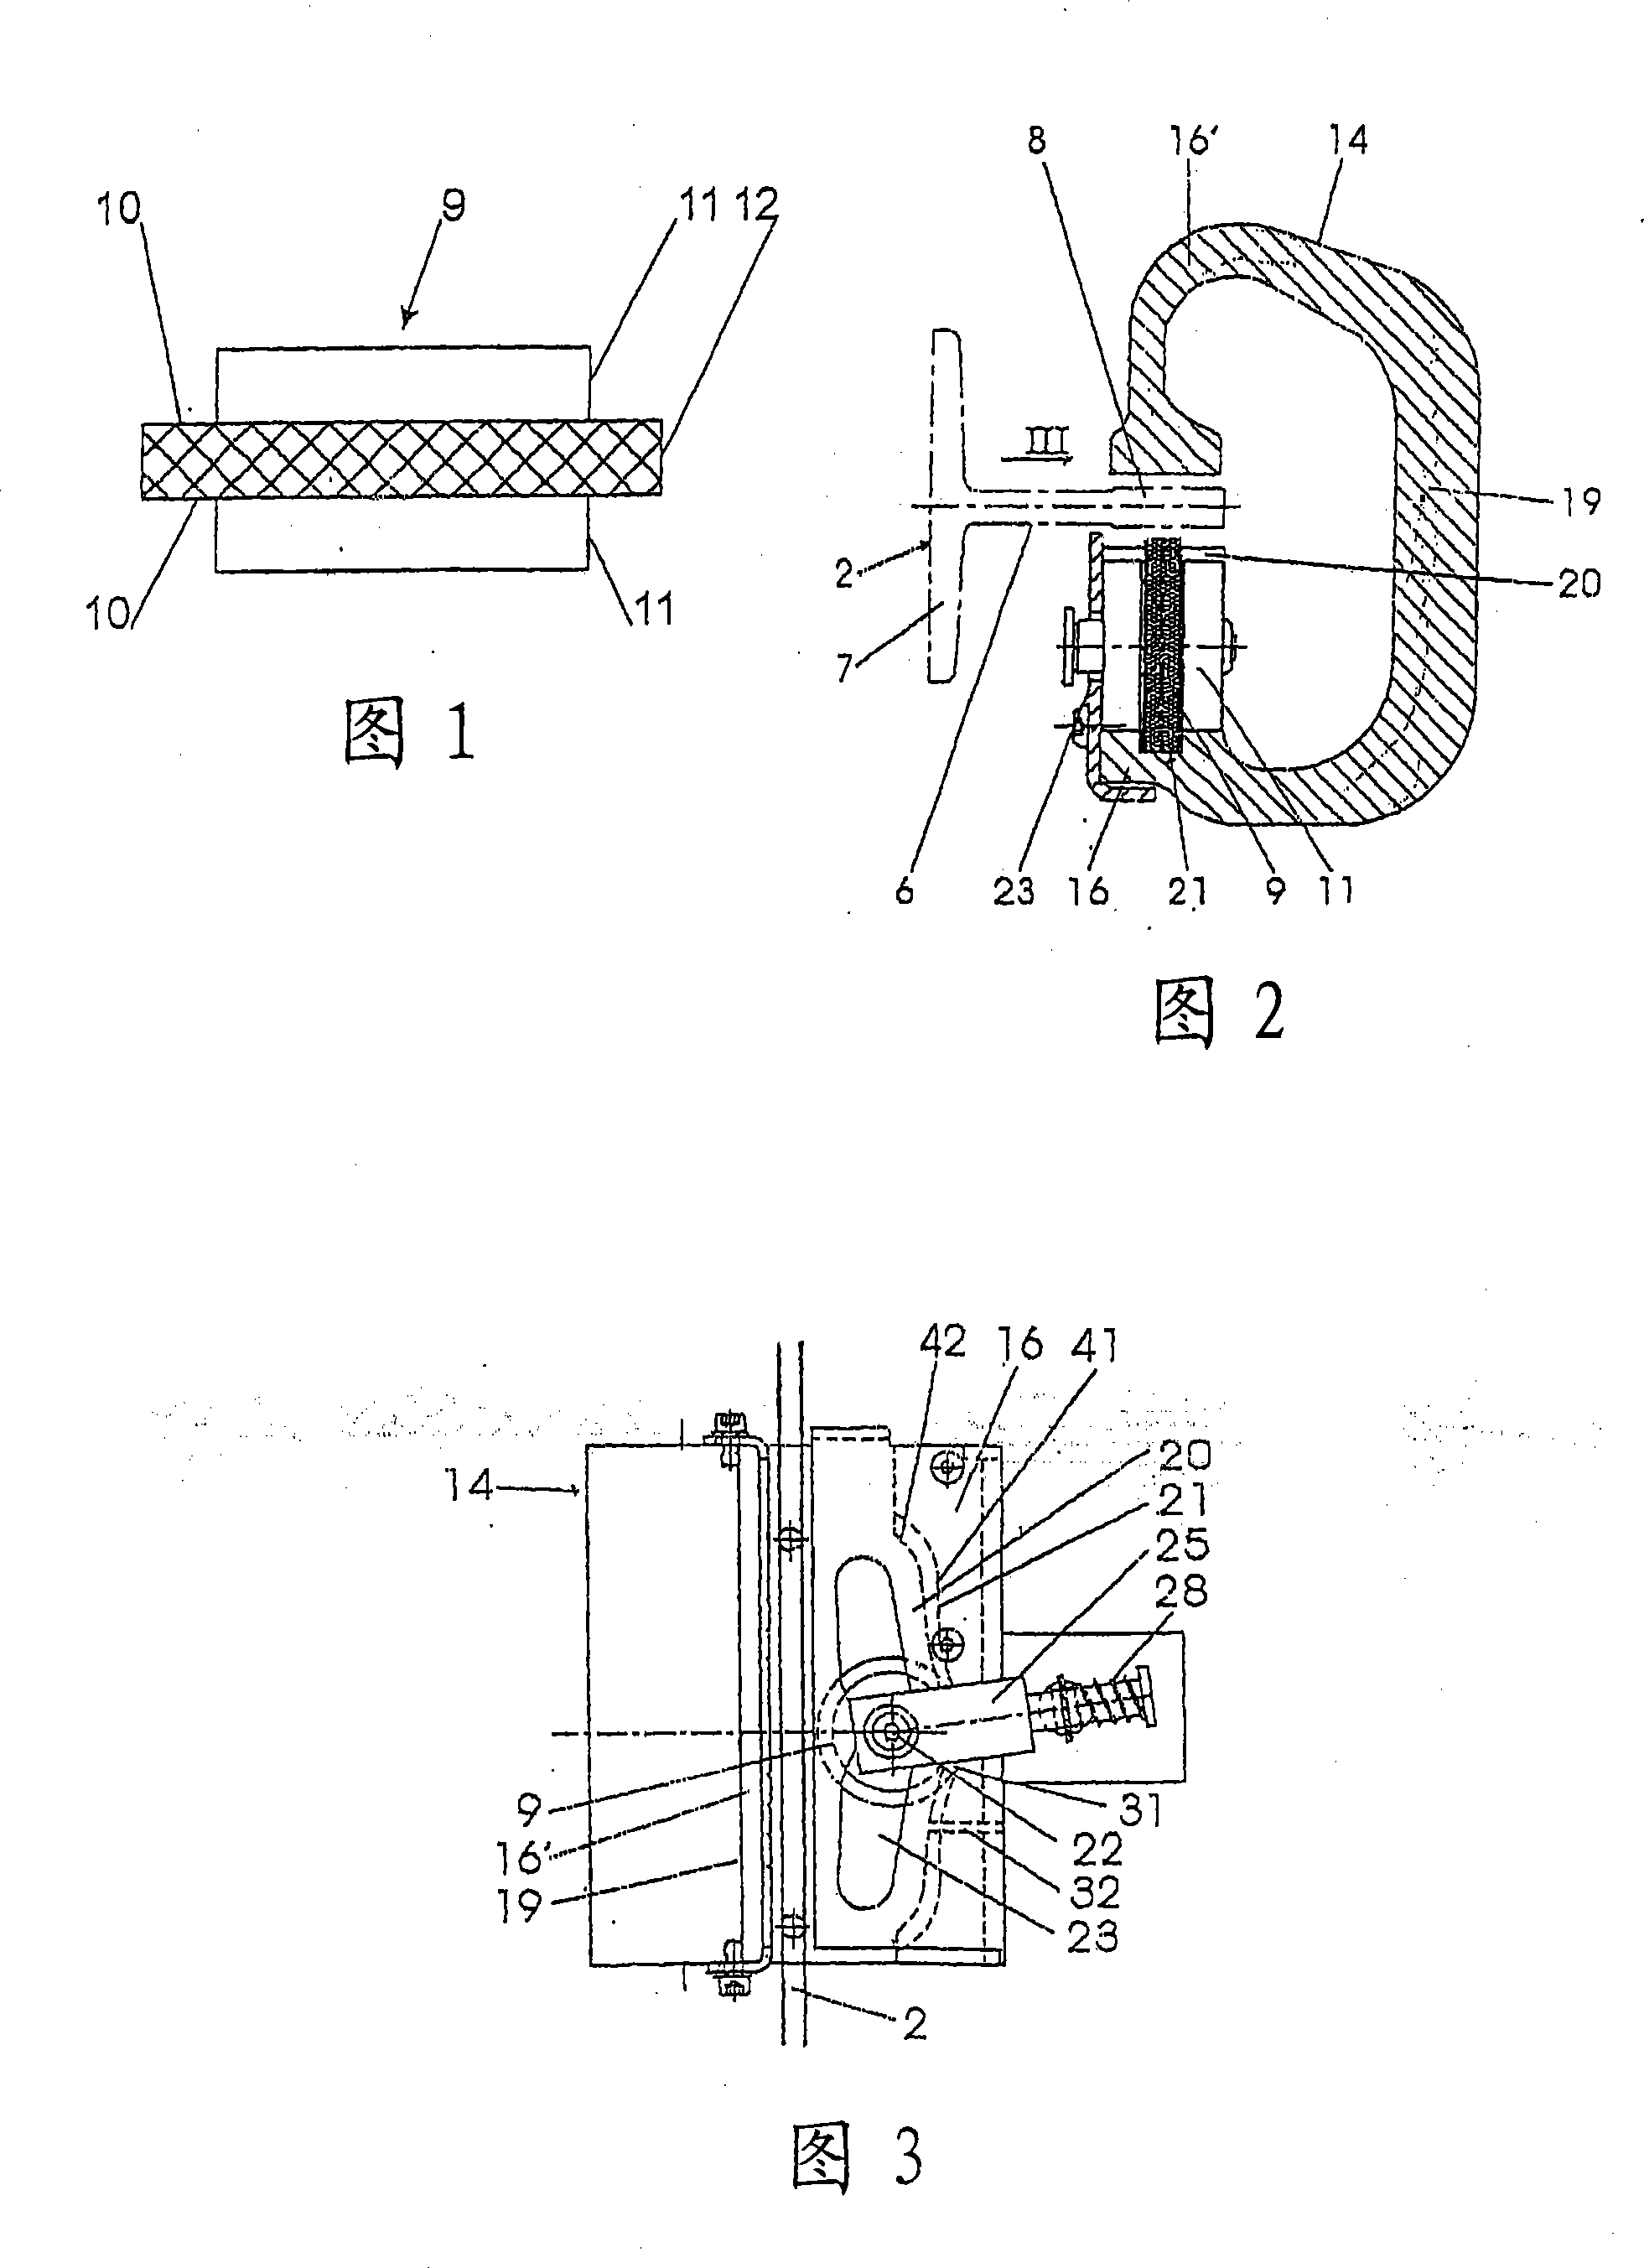 Brake device or safety clamp for protecting temporary elevator safety space